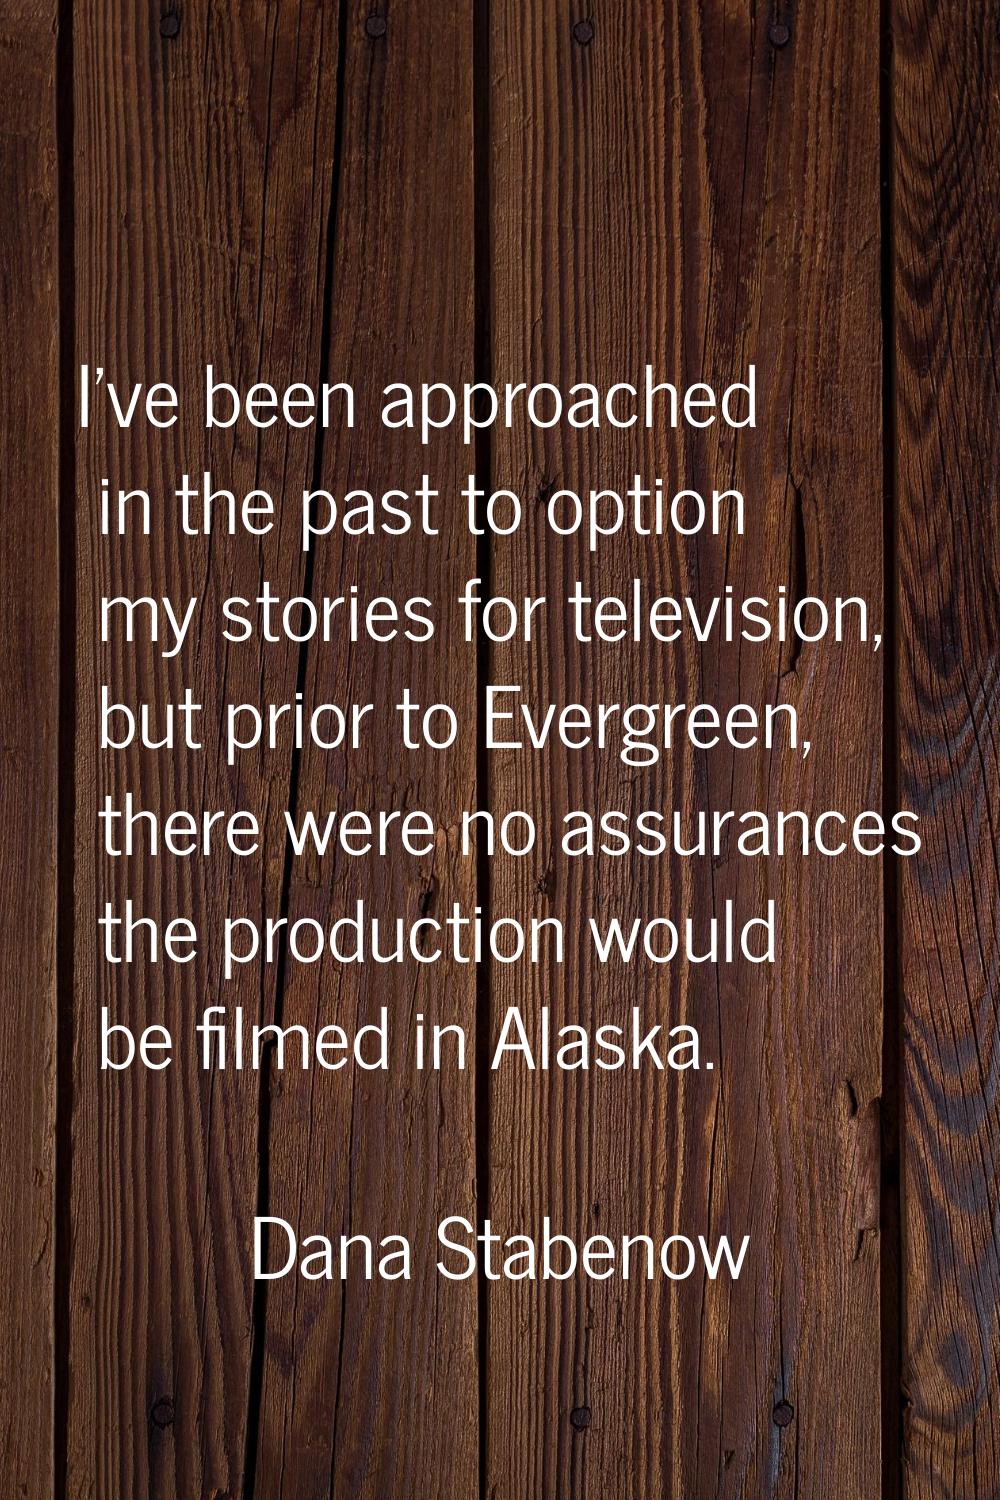 I've been approached in the past to option my stories for television, but prior to Evergreen, there